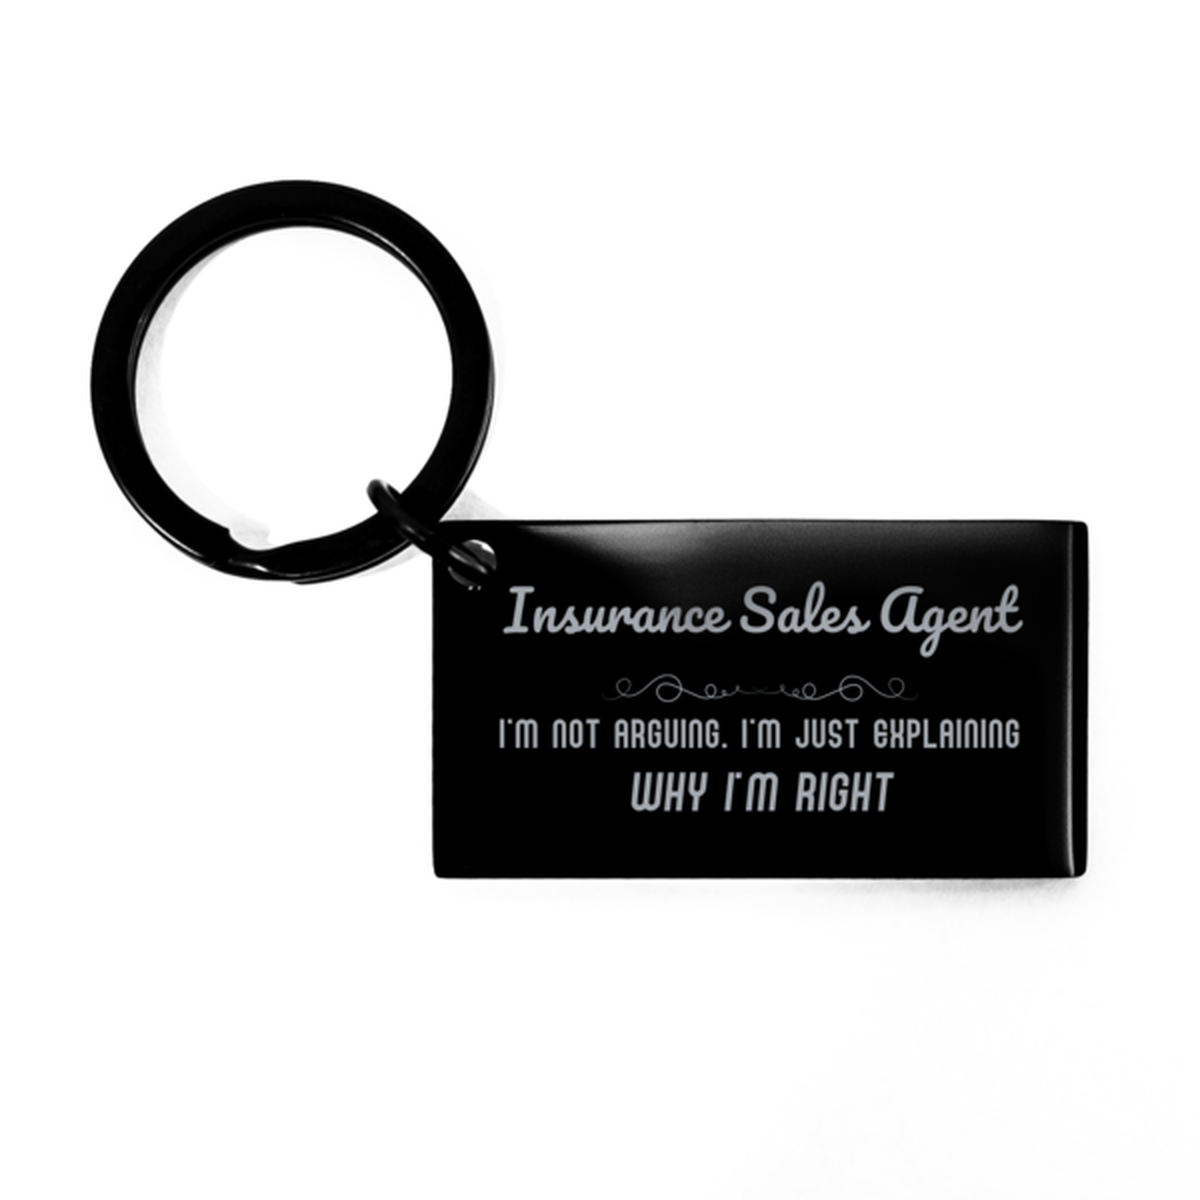 Insurance Sales Agent I'm not Arguing. I'm Just Explaining Why I'm RIGHT Keychain, Funny Saying Quote Insurance Sales Agent Gifts For Insurance Sales Agent Graduation Birthday Christmas Gifts for Men Women Coworker